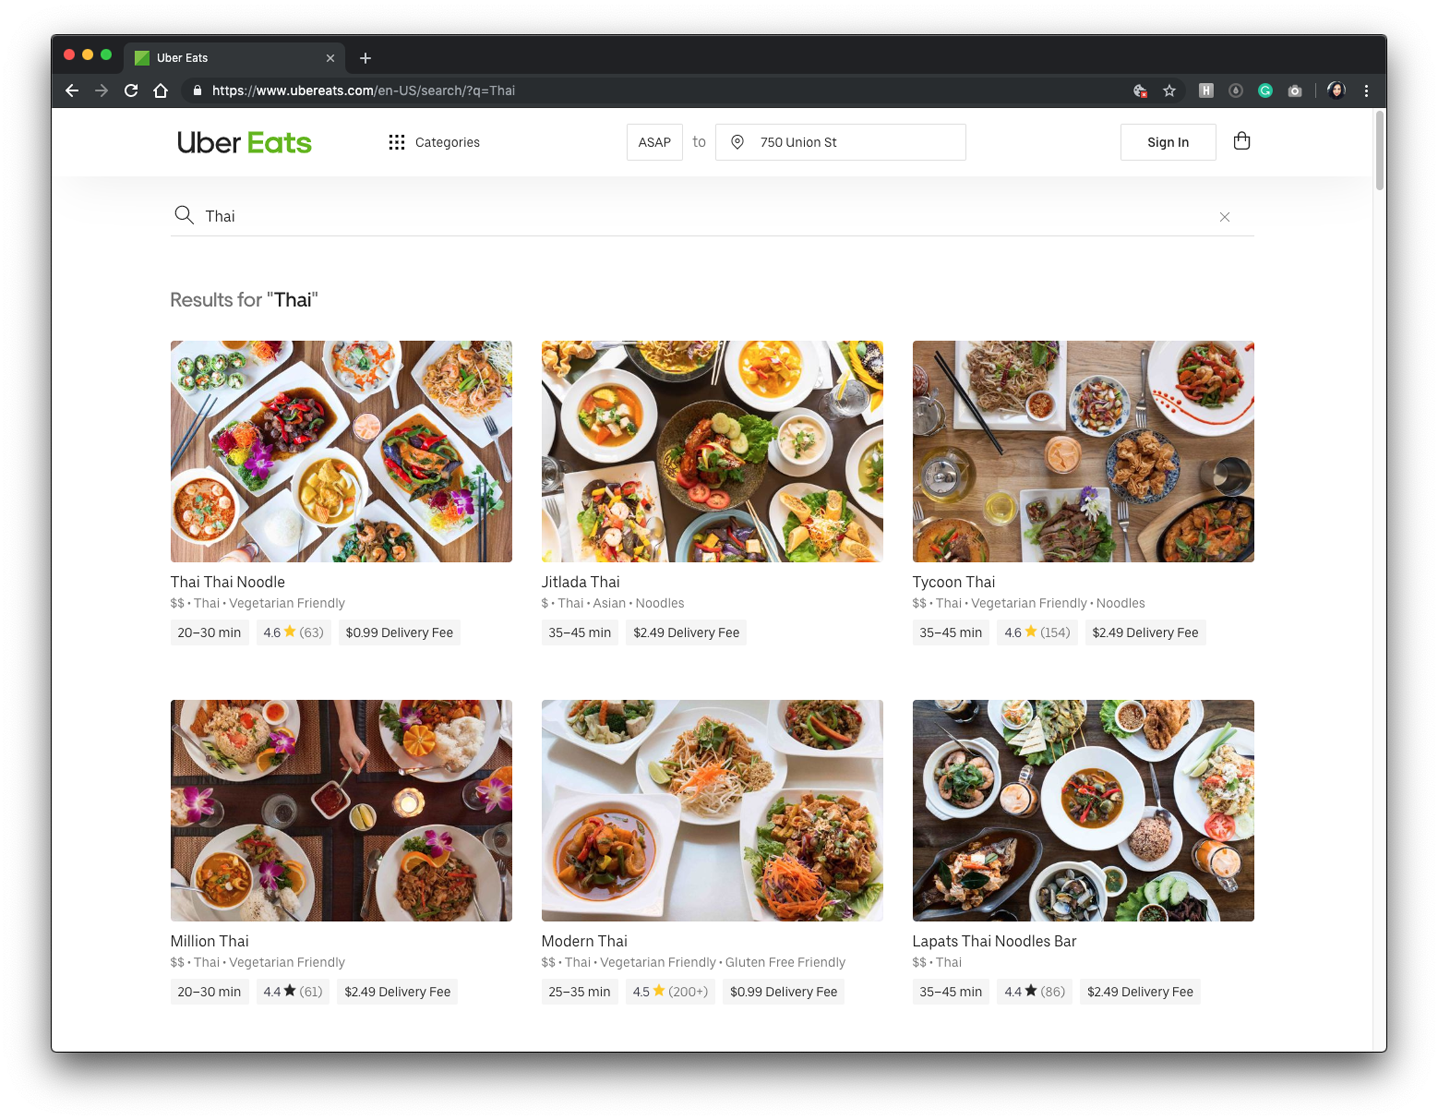 Uber Eats search results